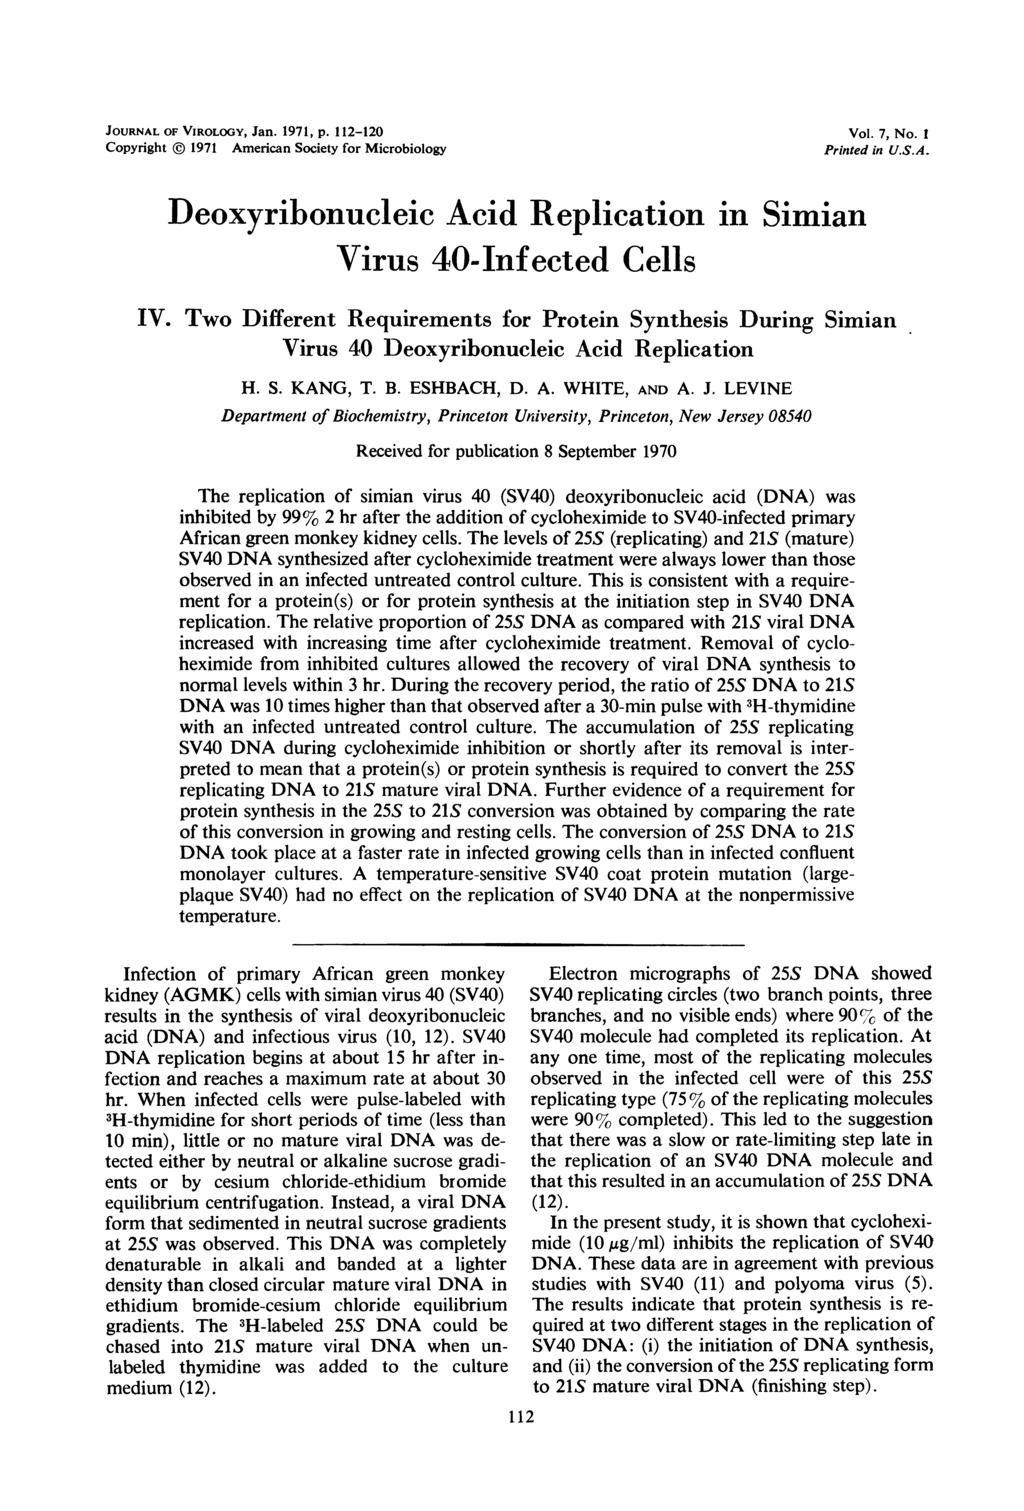 JOURNAL OF VIROLOGY, Jan. 1971, p. 112-120 Vol. 7, No. I Copyright 1971 American Society for Microbiology Printed in U.S.A. Deoxyribonucleic Acid Replication in Simian Virus 40-Infected Cells IV.